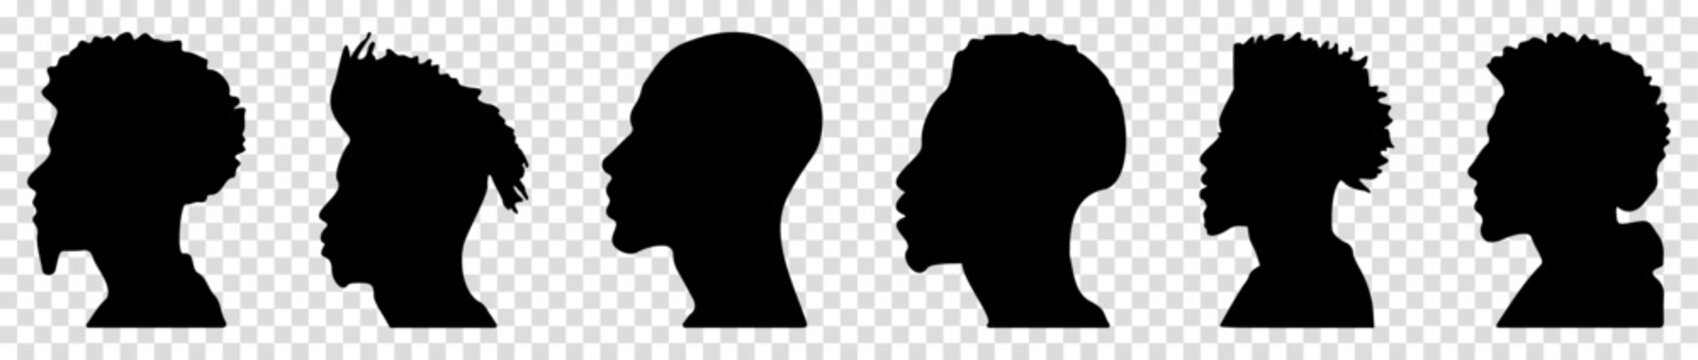 African American men profile with various hairstyles. Vector illustration isolated on transparent background